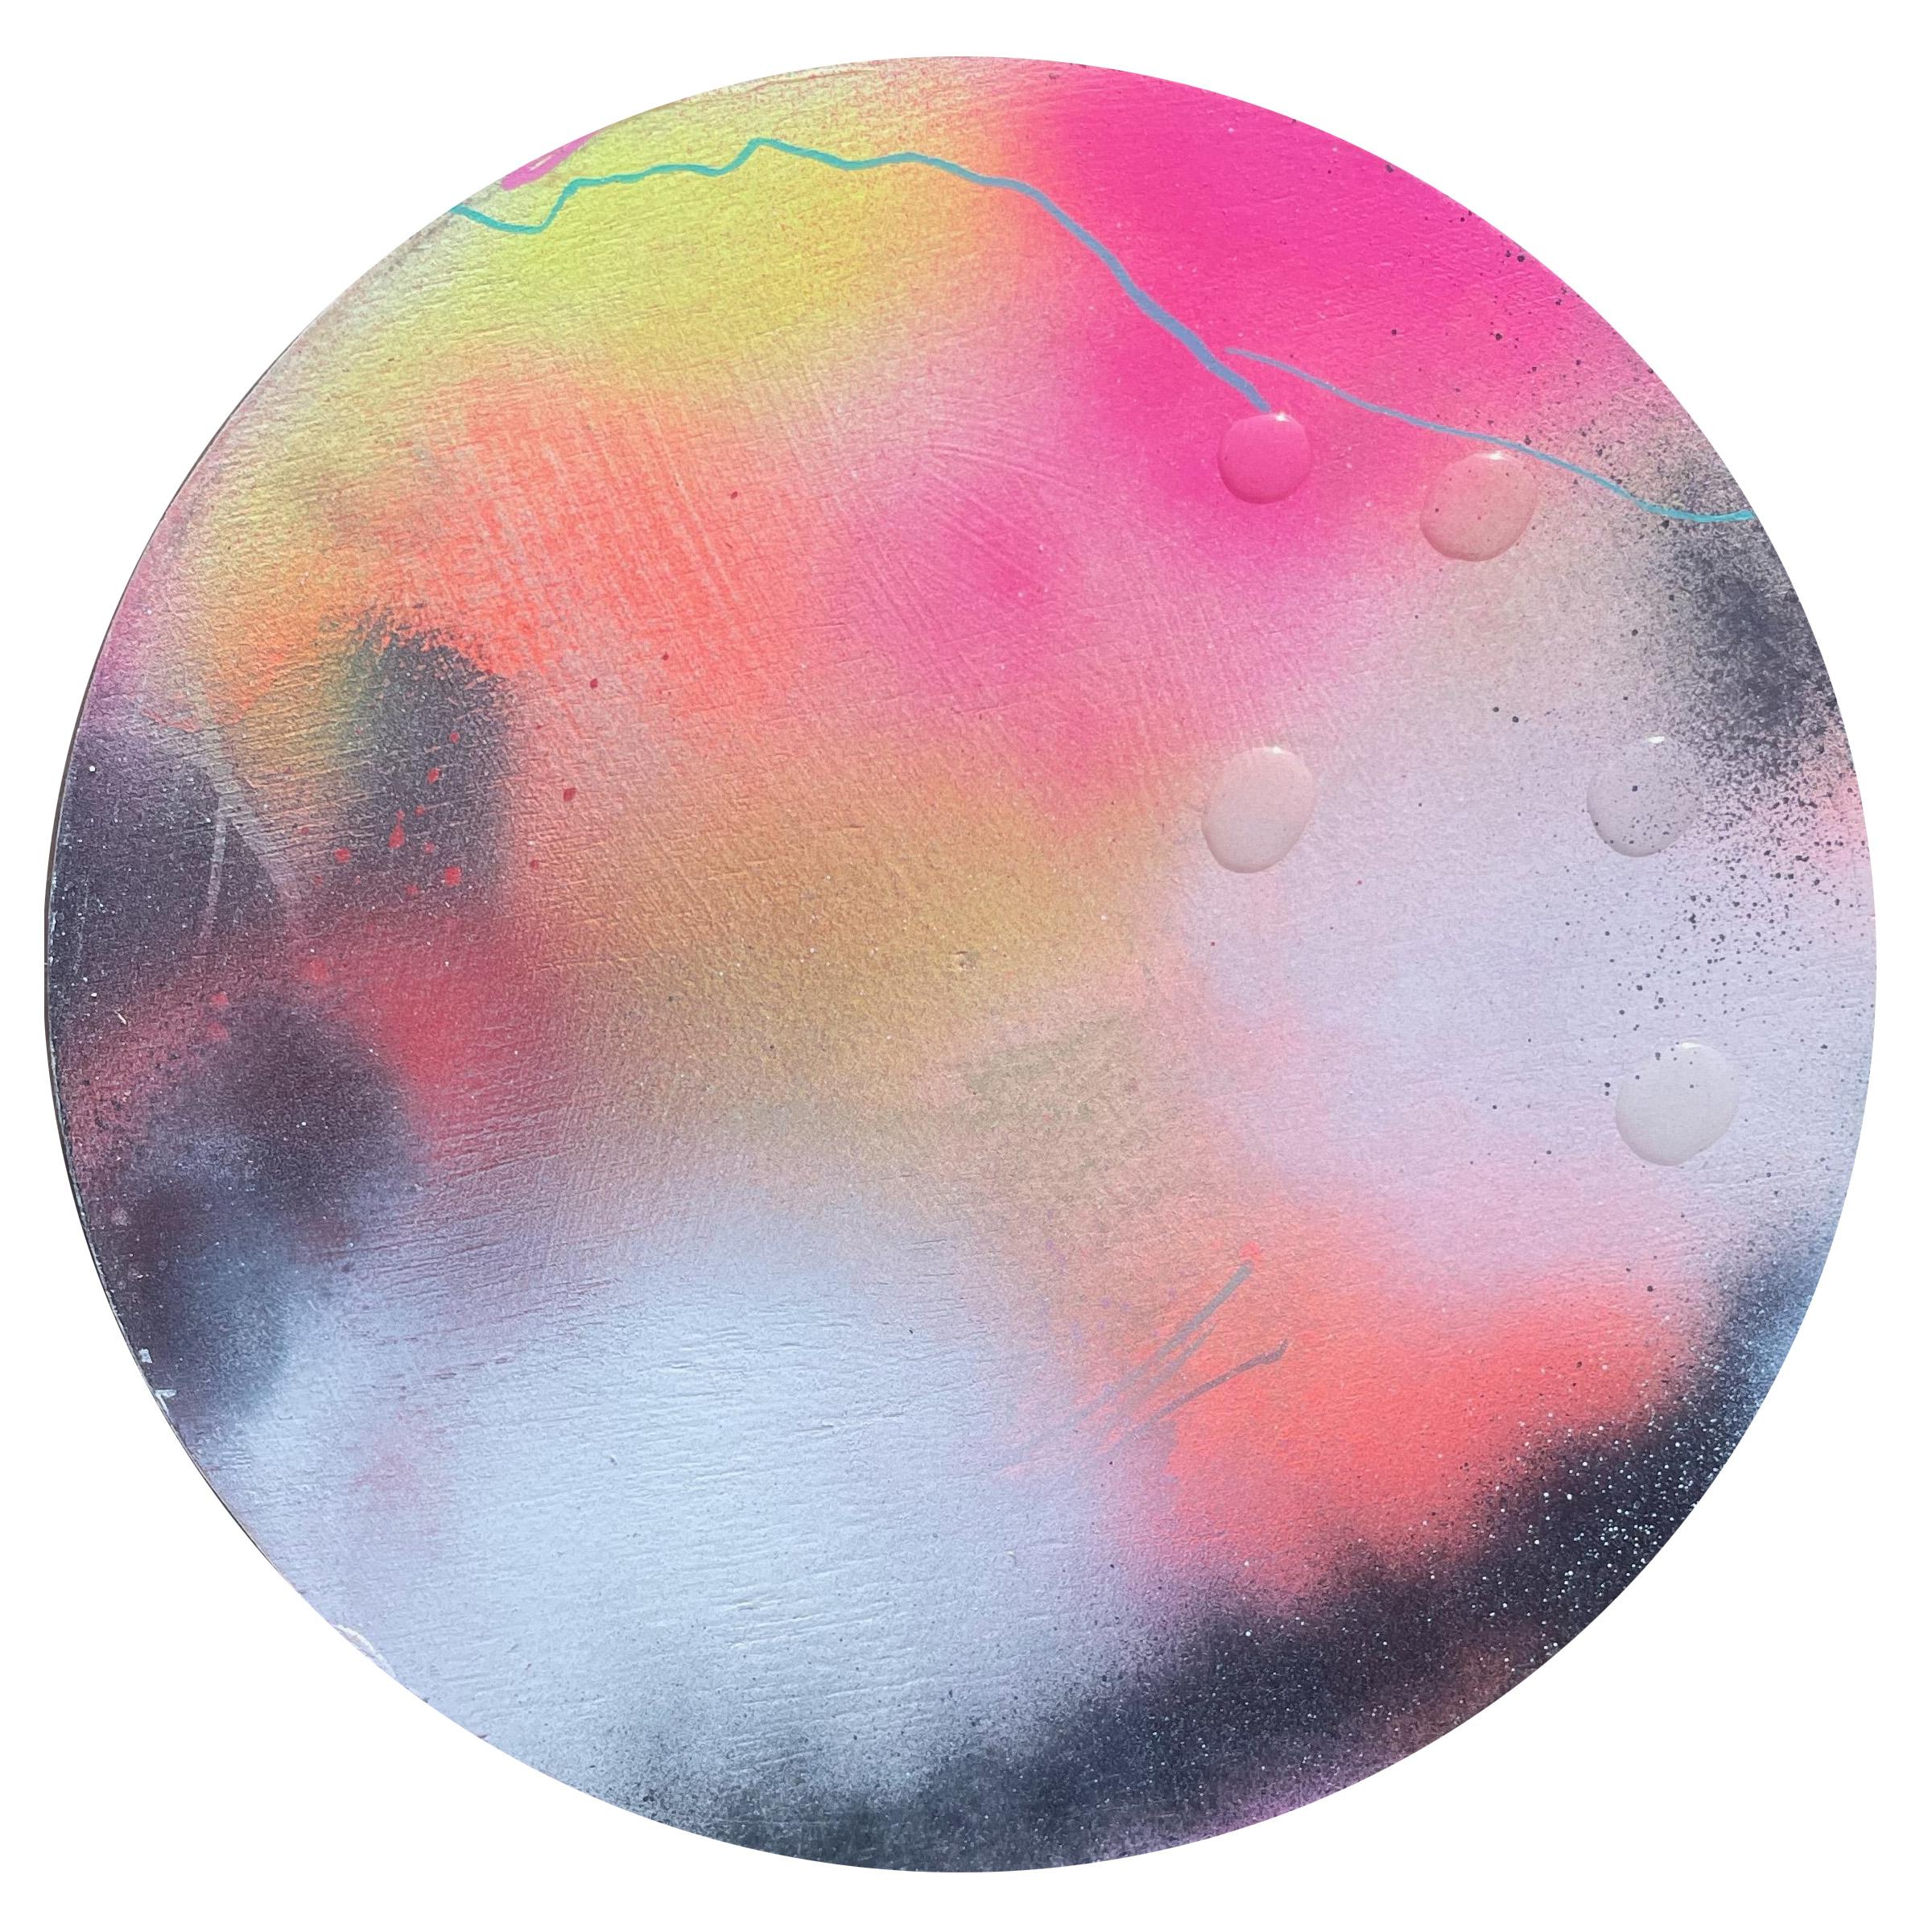 "Pearly Dewdrops 1" Contemporary Colorful Abstract Circular Painting